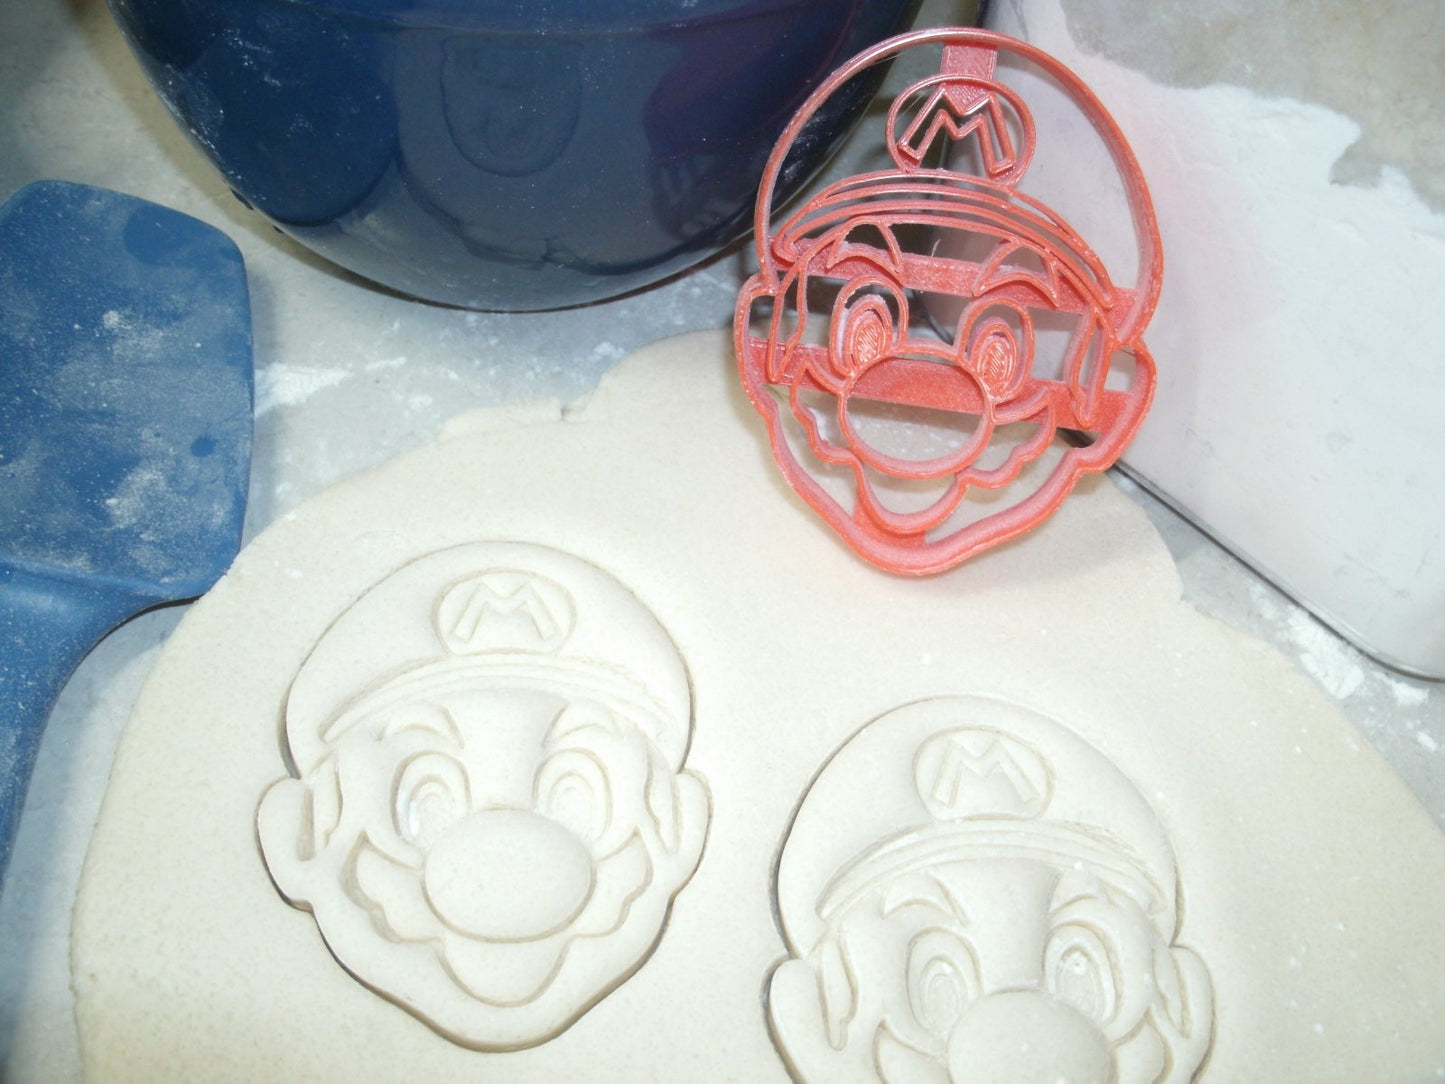 Mario Nintendo Video Game Character Cookie Cutter Made in USA PR747